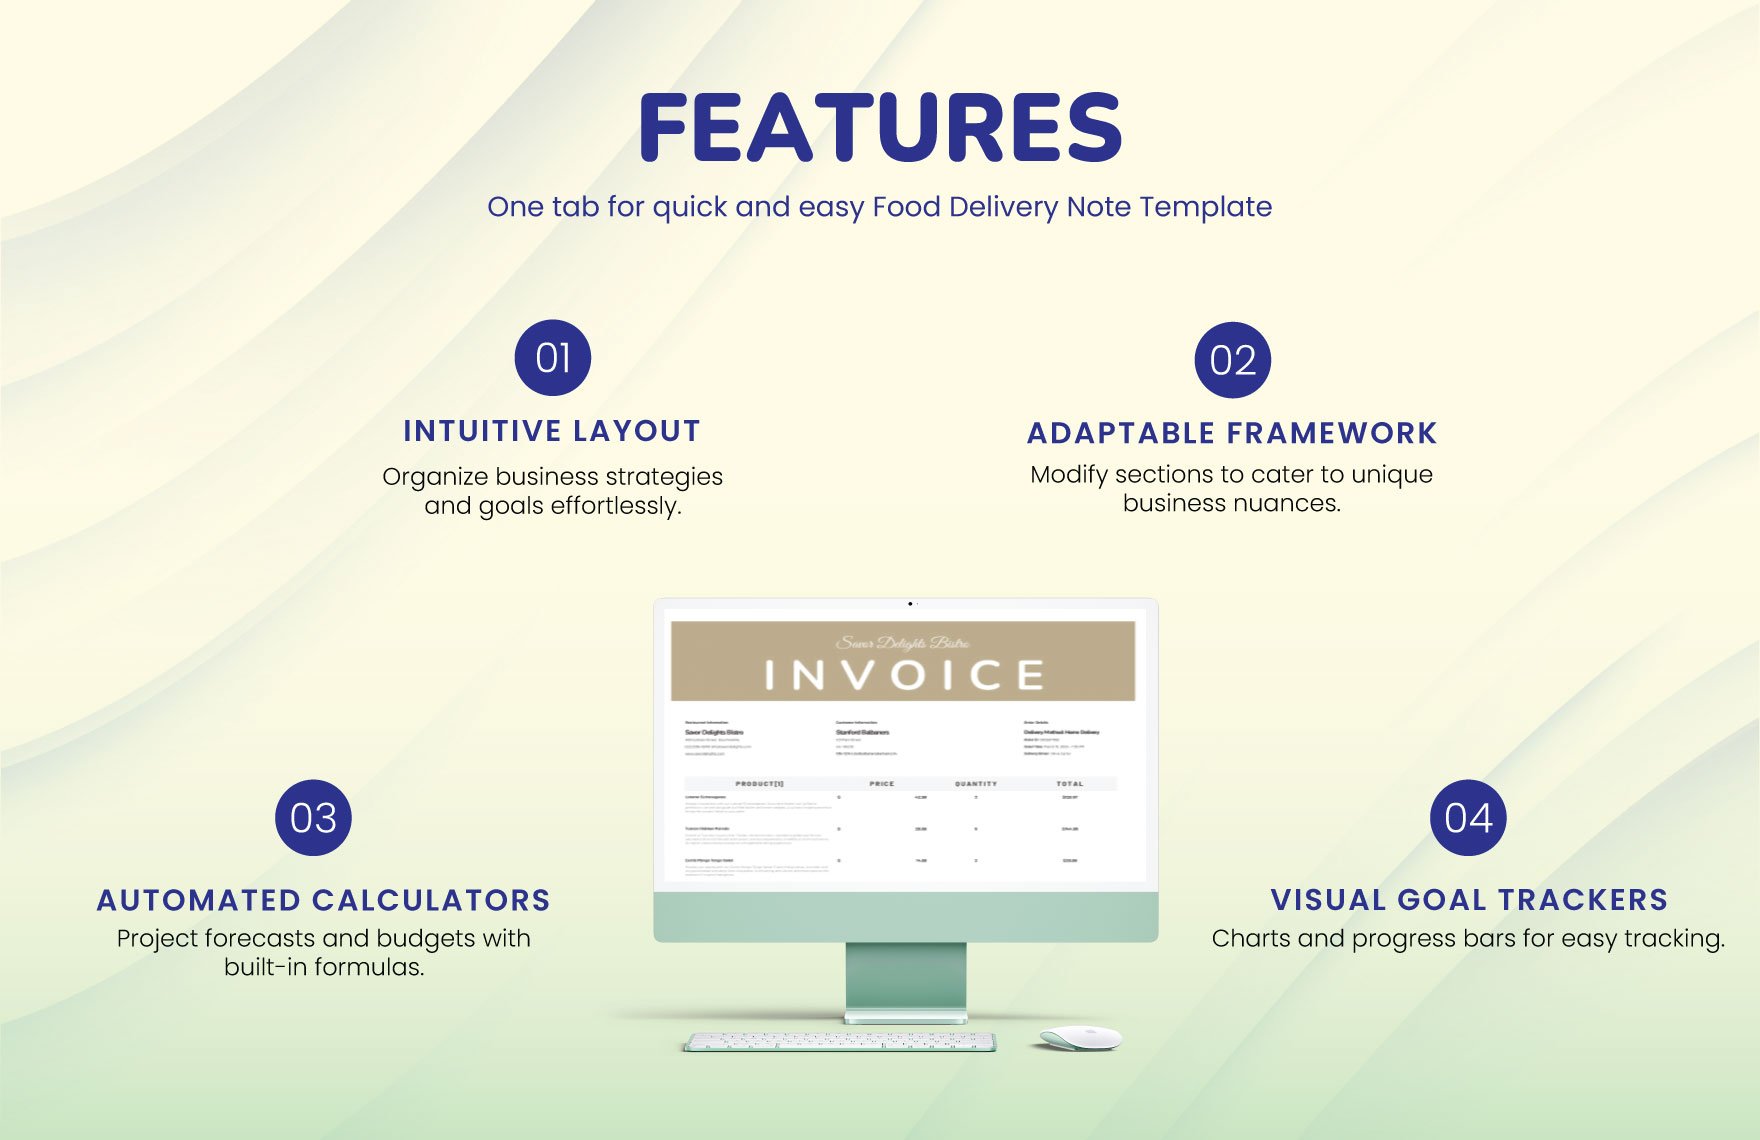 Food Delivery Note Template